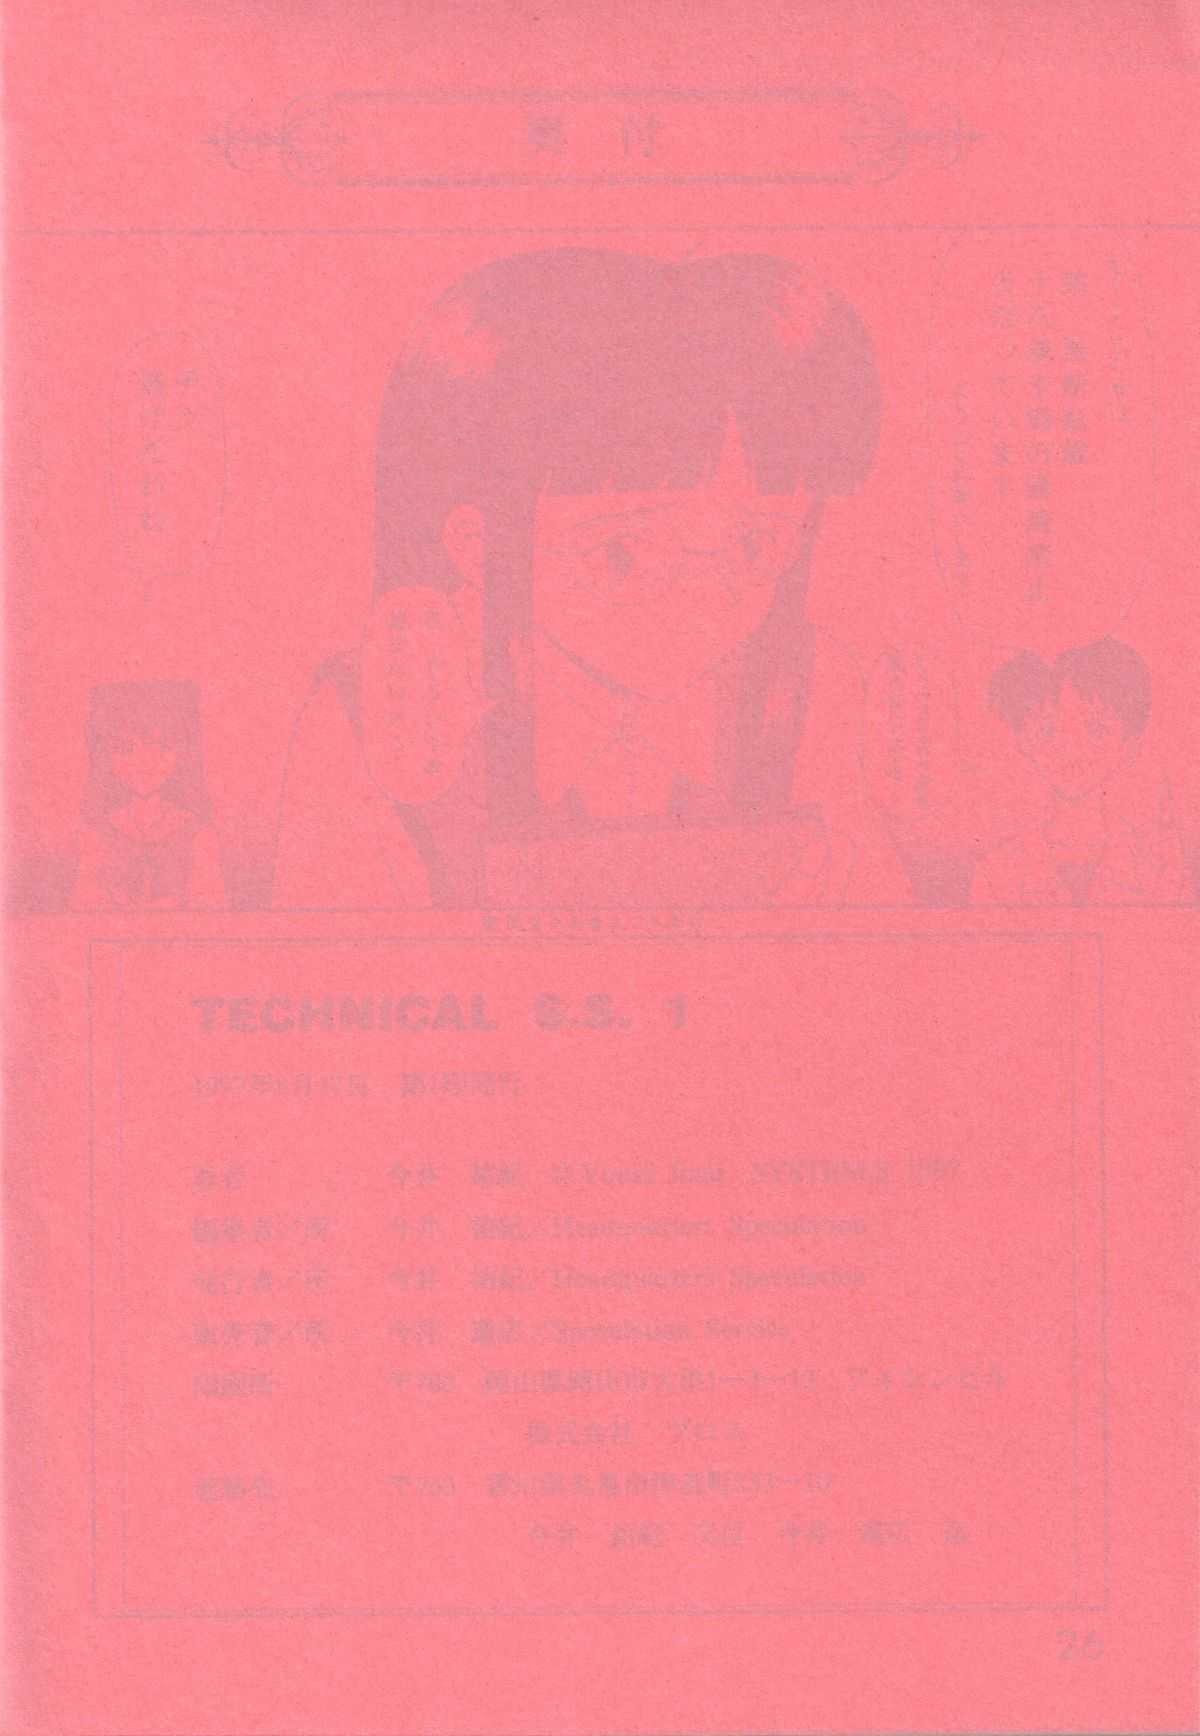 [System Speculation] Technical S.S.1 - 2nd Impression (Evangelion) [ENG] 